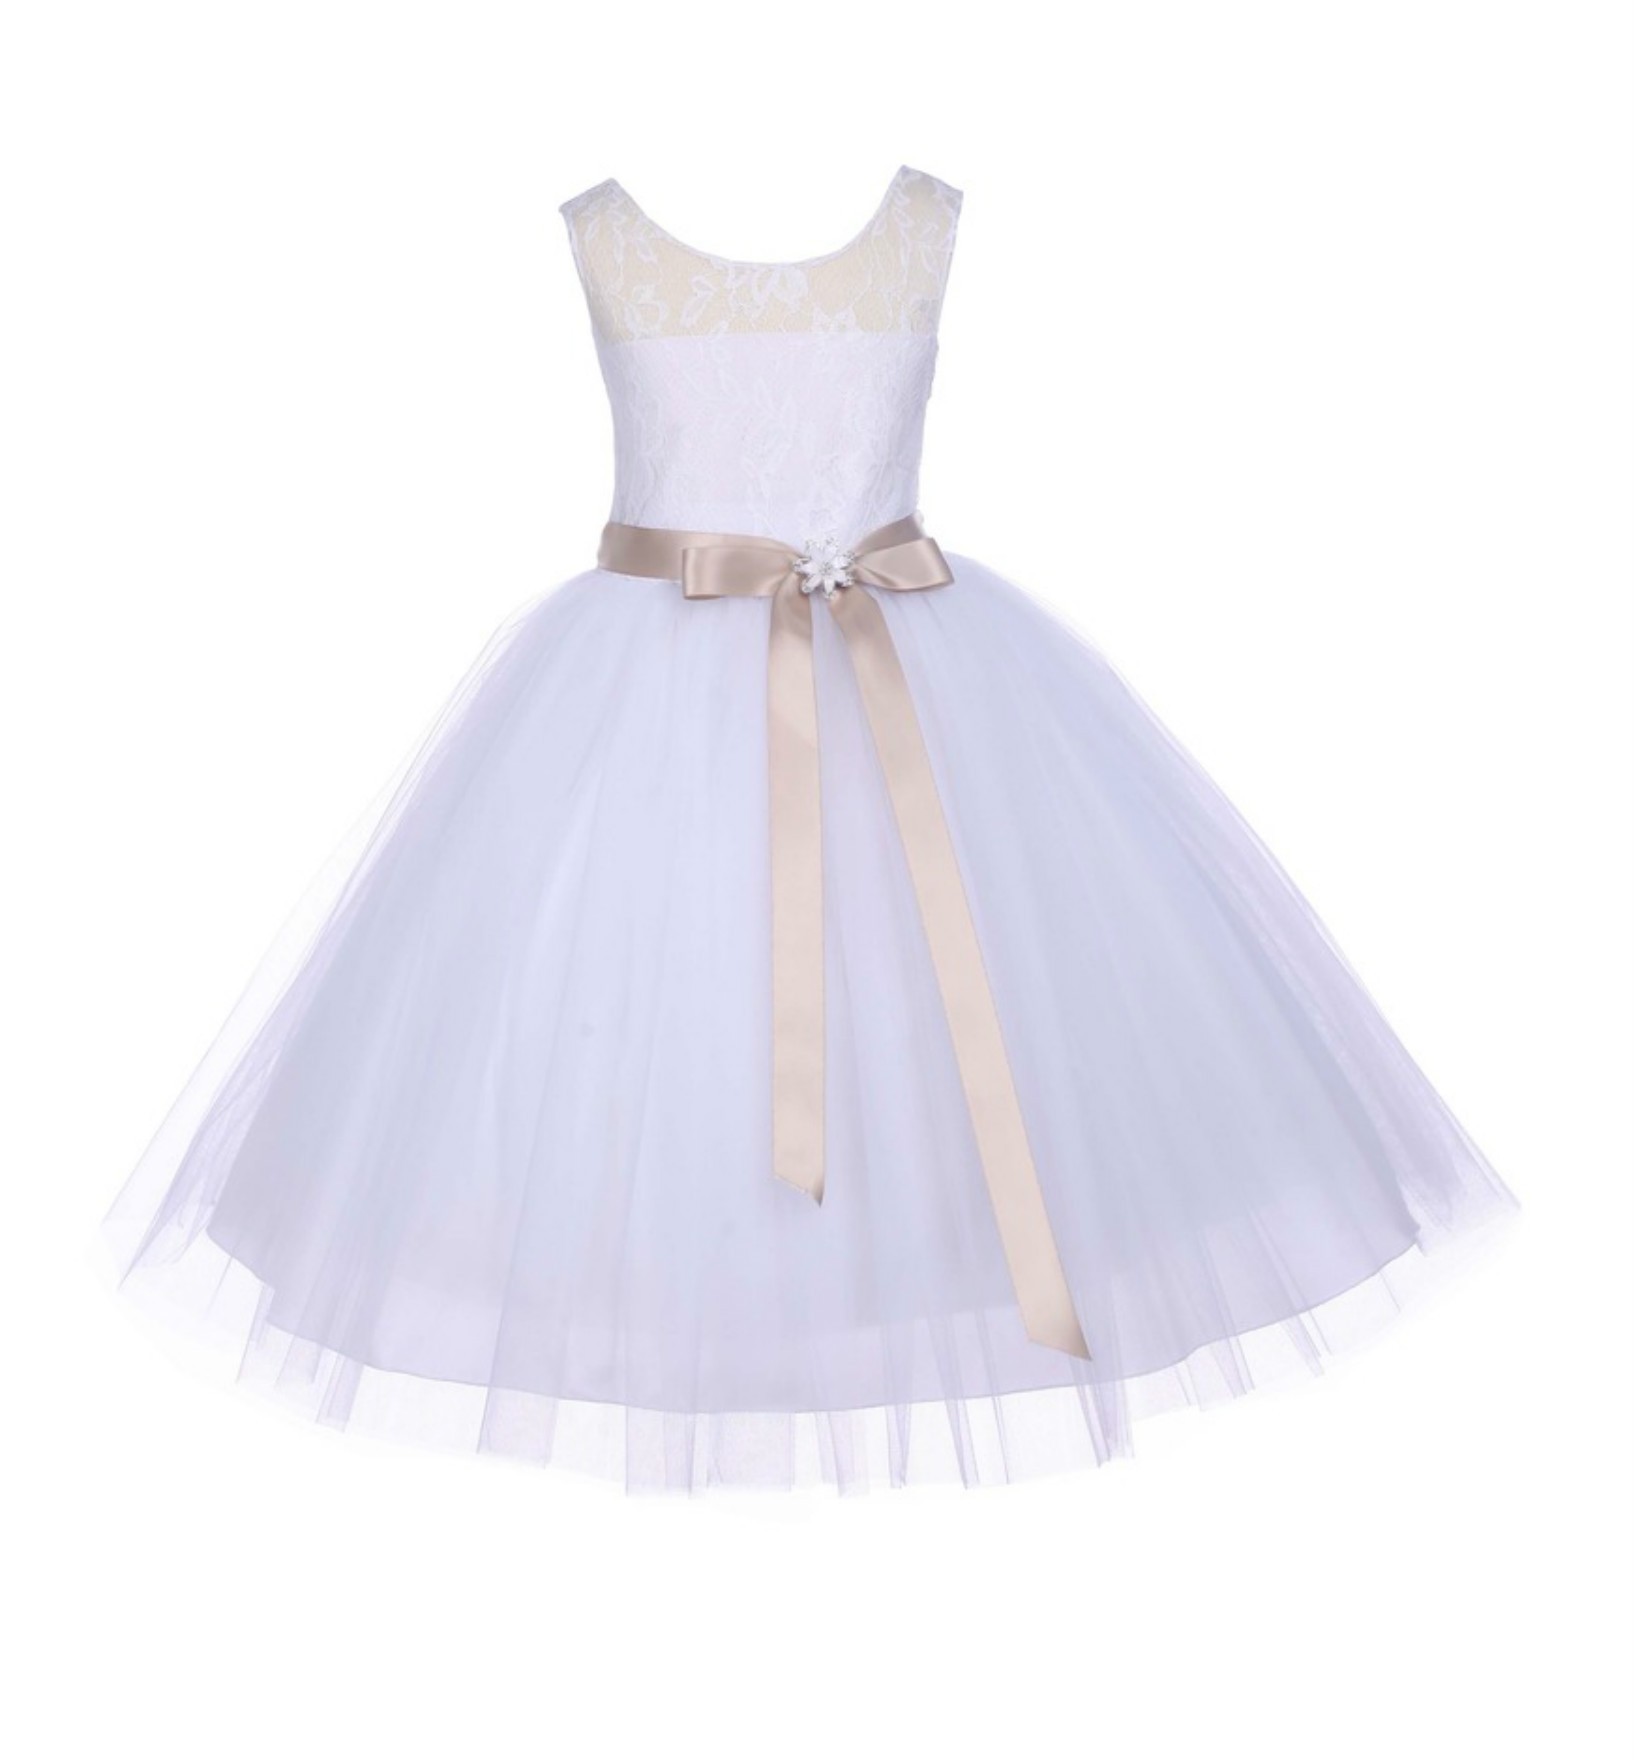 White Floral Lace Bodice Tulle Champagne Ribbon Flower Girl Dress 153R